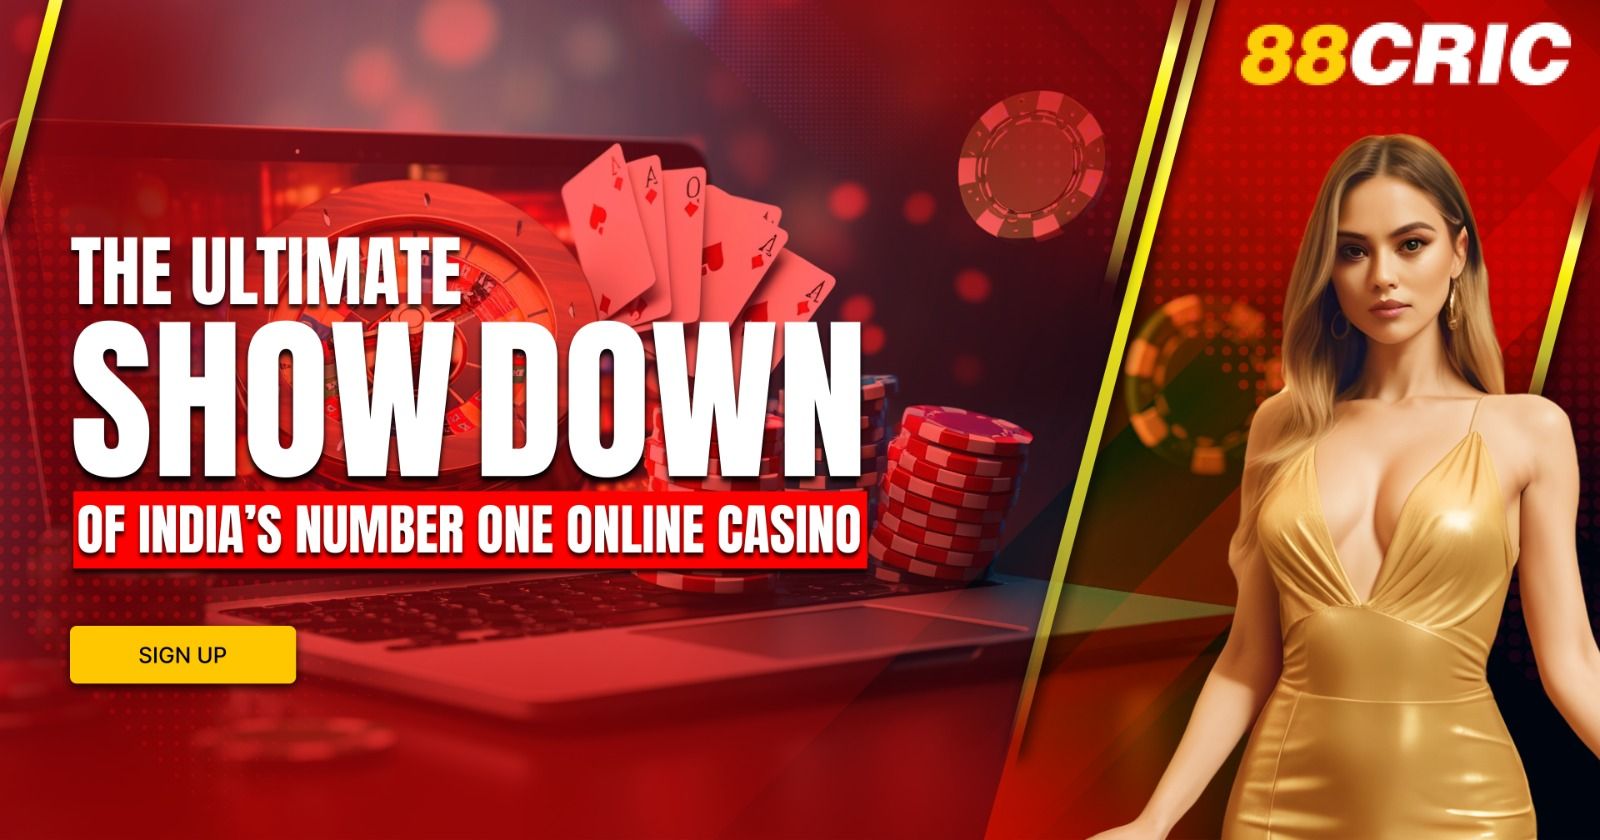 The Ultimate Show Down of India’s Number One Online Casino.